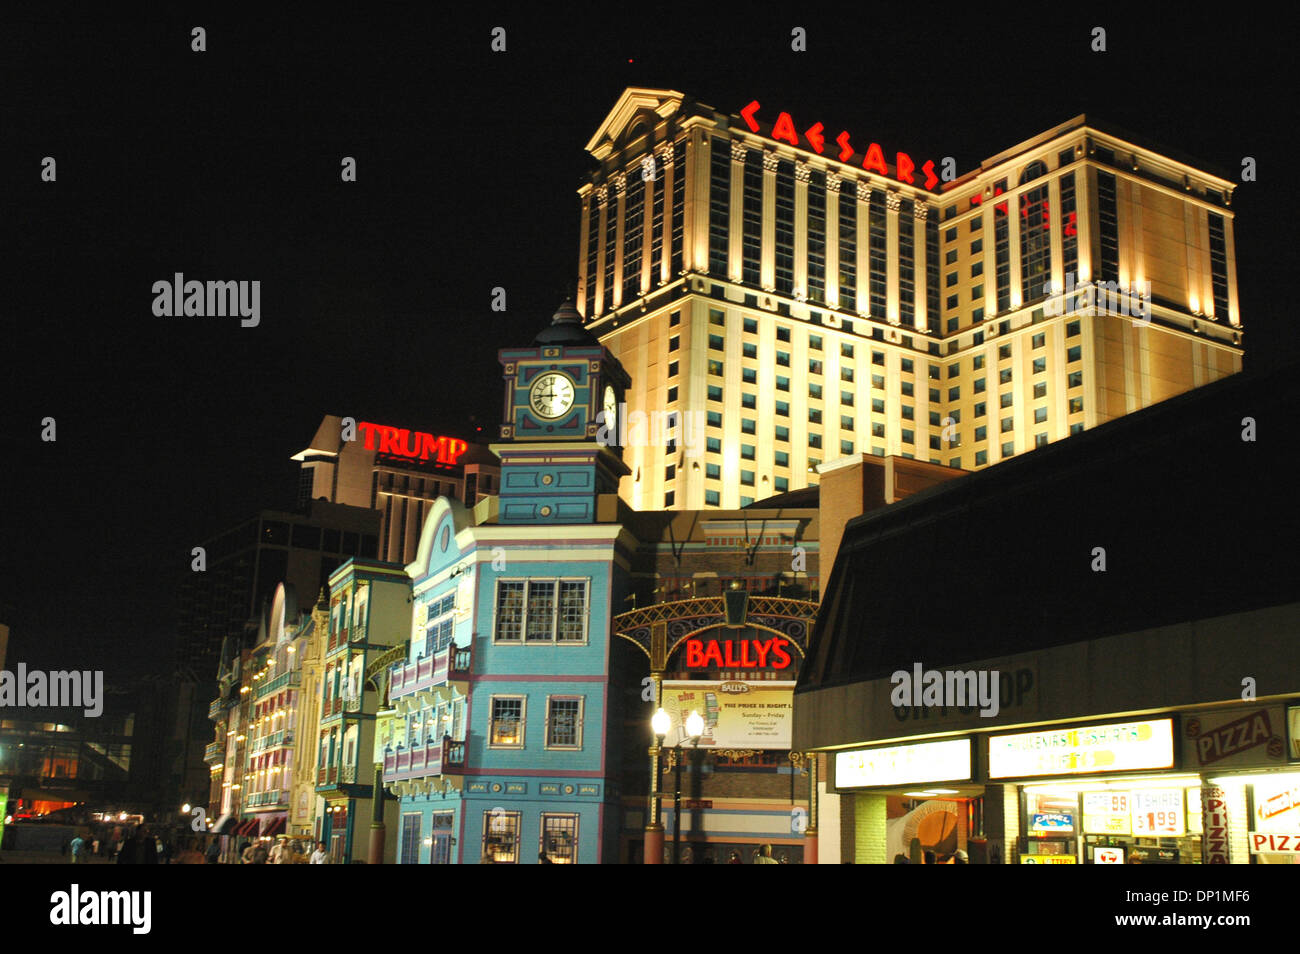 May 06, 2006; Atlantic City, NJ, USA; Atlantic City is always turned on, with attractions such as Caesars Palace, Trump Plaza, and Bally's Casino, pictured at night, the skyline view from the boardwalk in Atlantic City, NJ, on May 6, 2006. Mandatory Credit: Photo by Tina Fultz/ZUMA Press. (©) Copyright 2006 by Tina Fultz Stock Photo